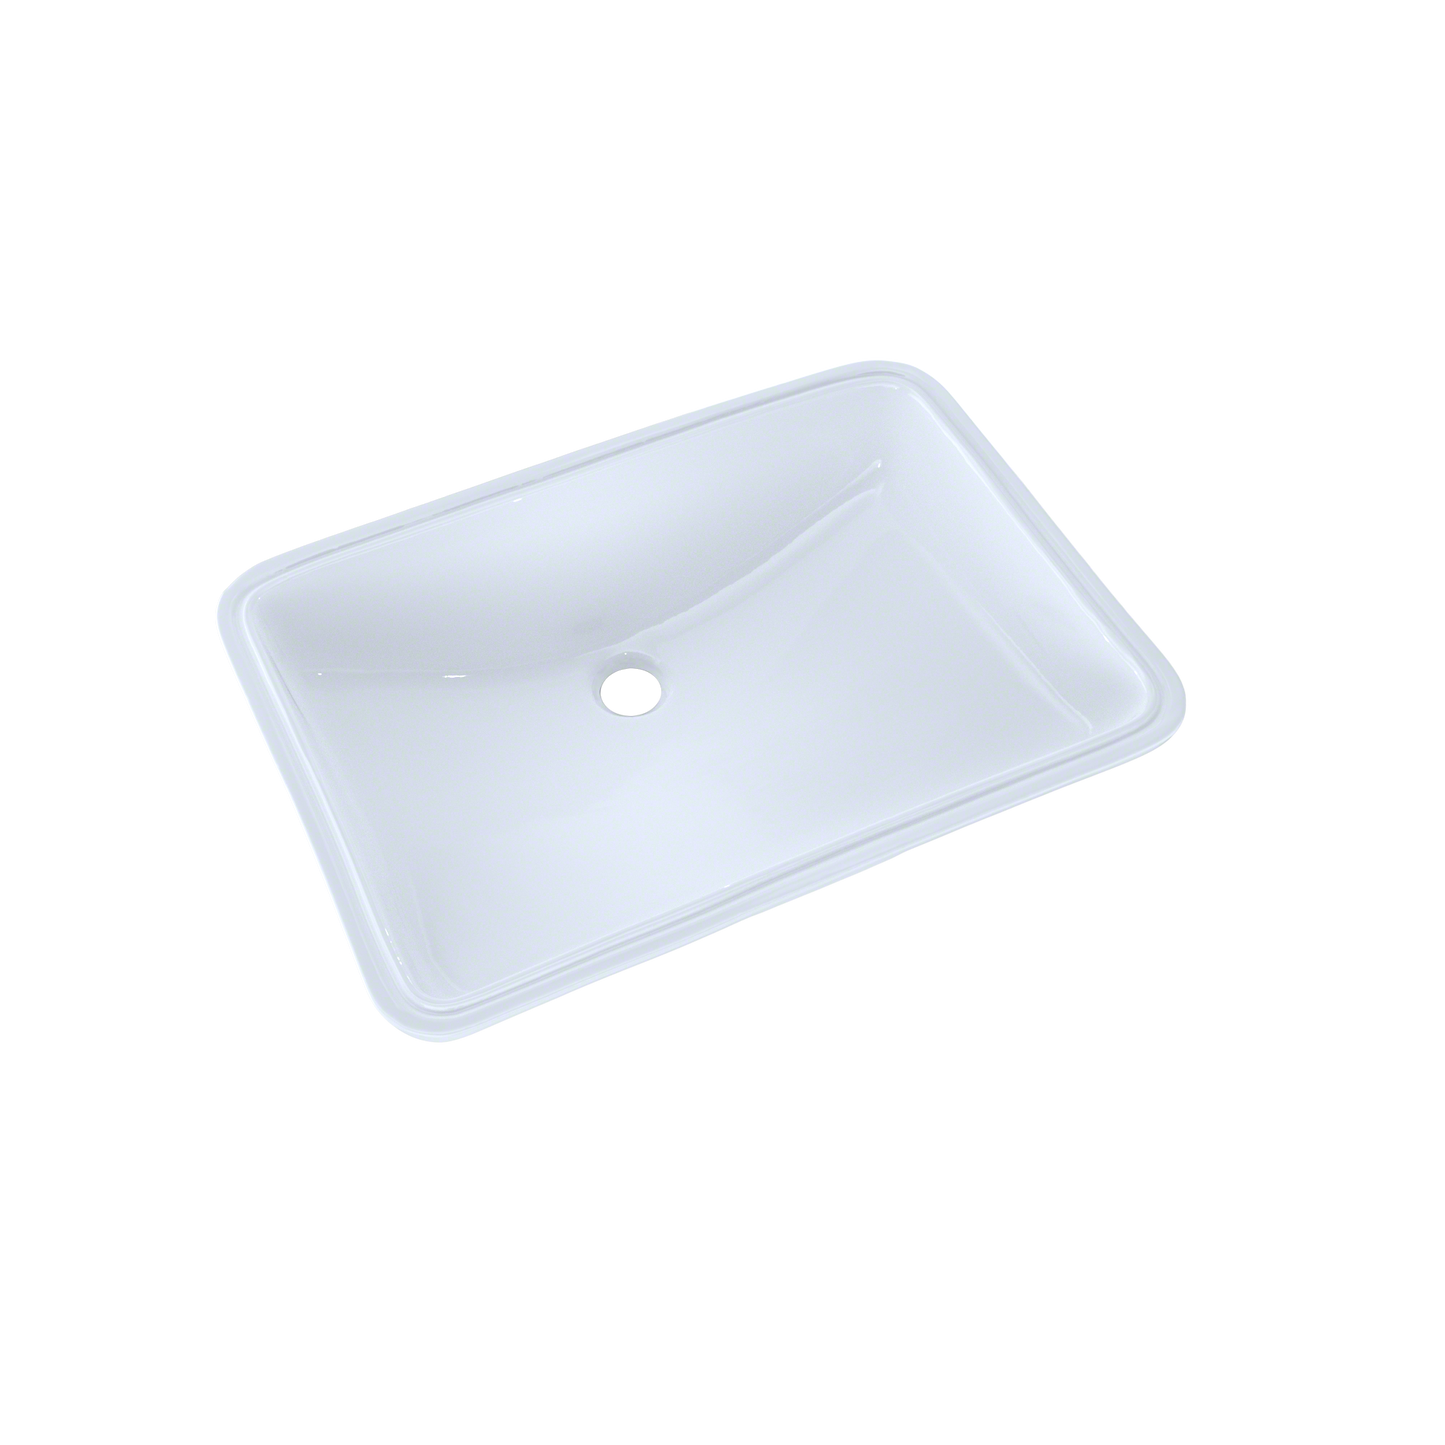 Toto LT540G#01 - 21-1/4" Undermount Bathroom Sink with Overflow and CeFiONtect Ceramic Glaze-COTTON